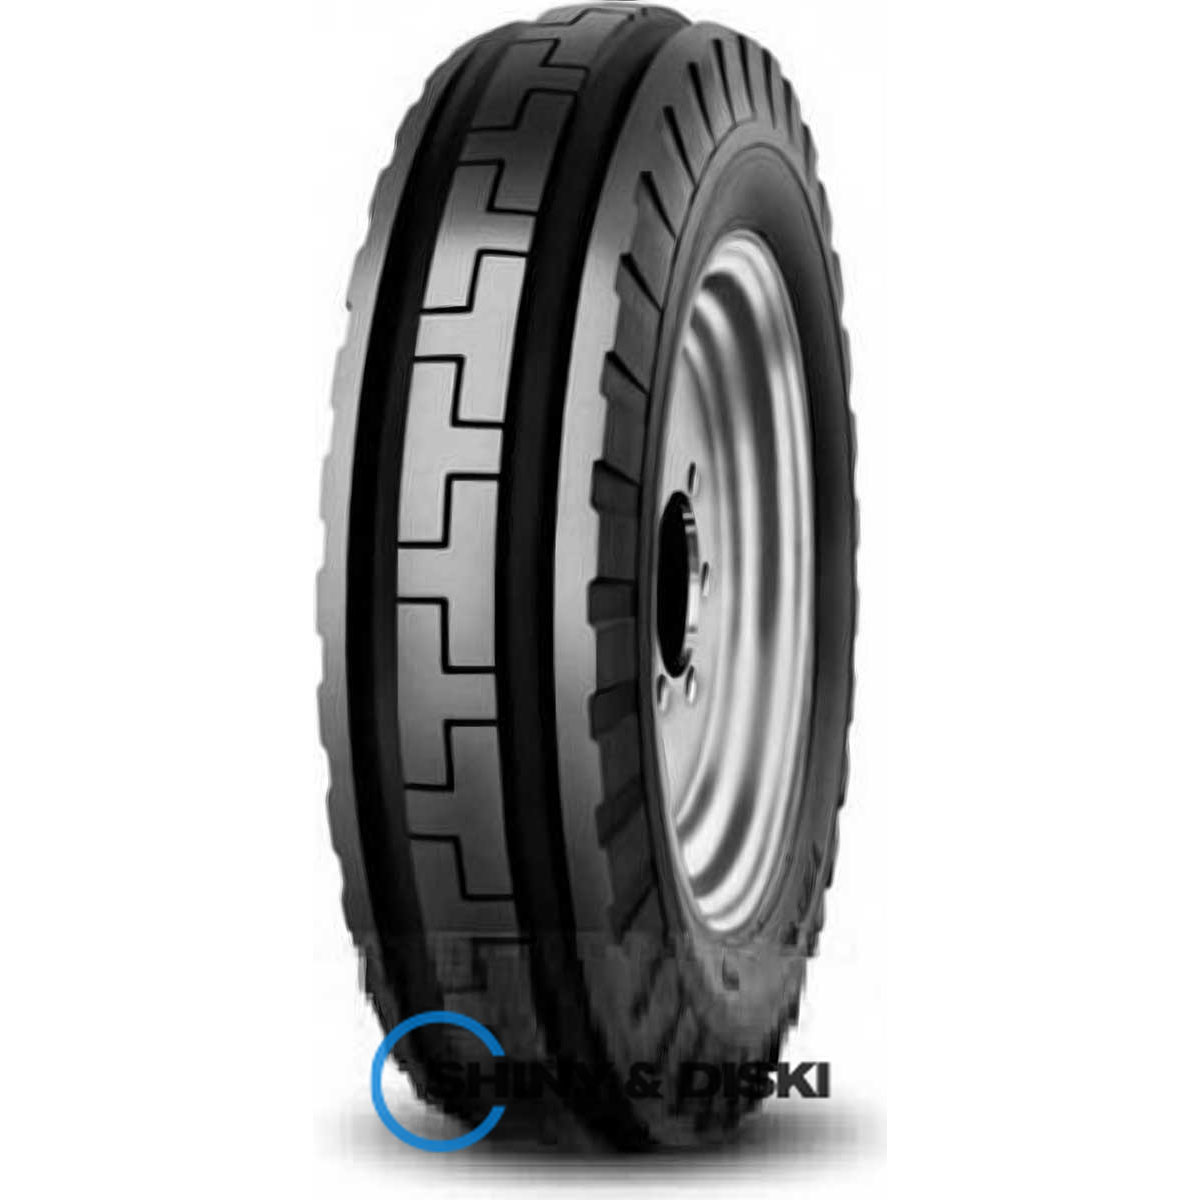 cultor as front 08 7.50 r16 98a6/90a8